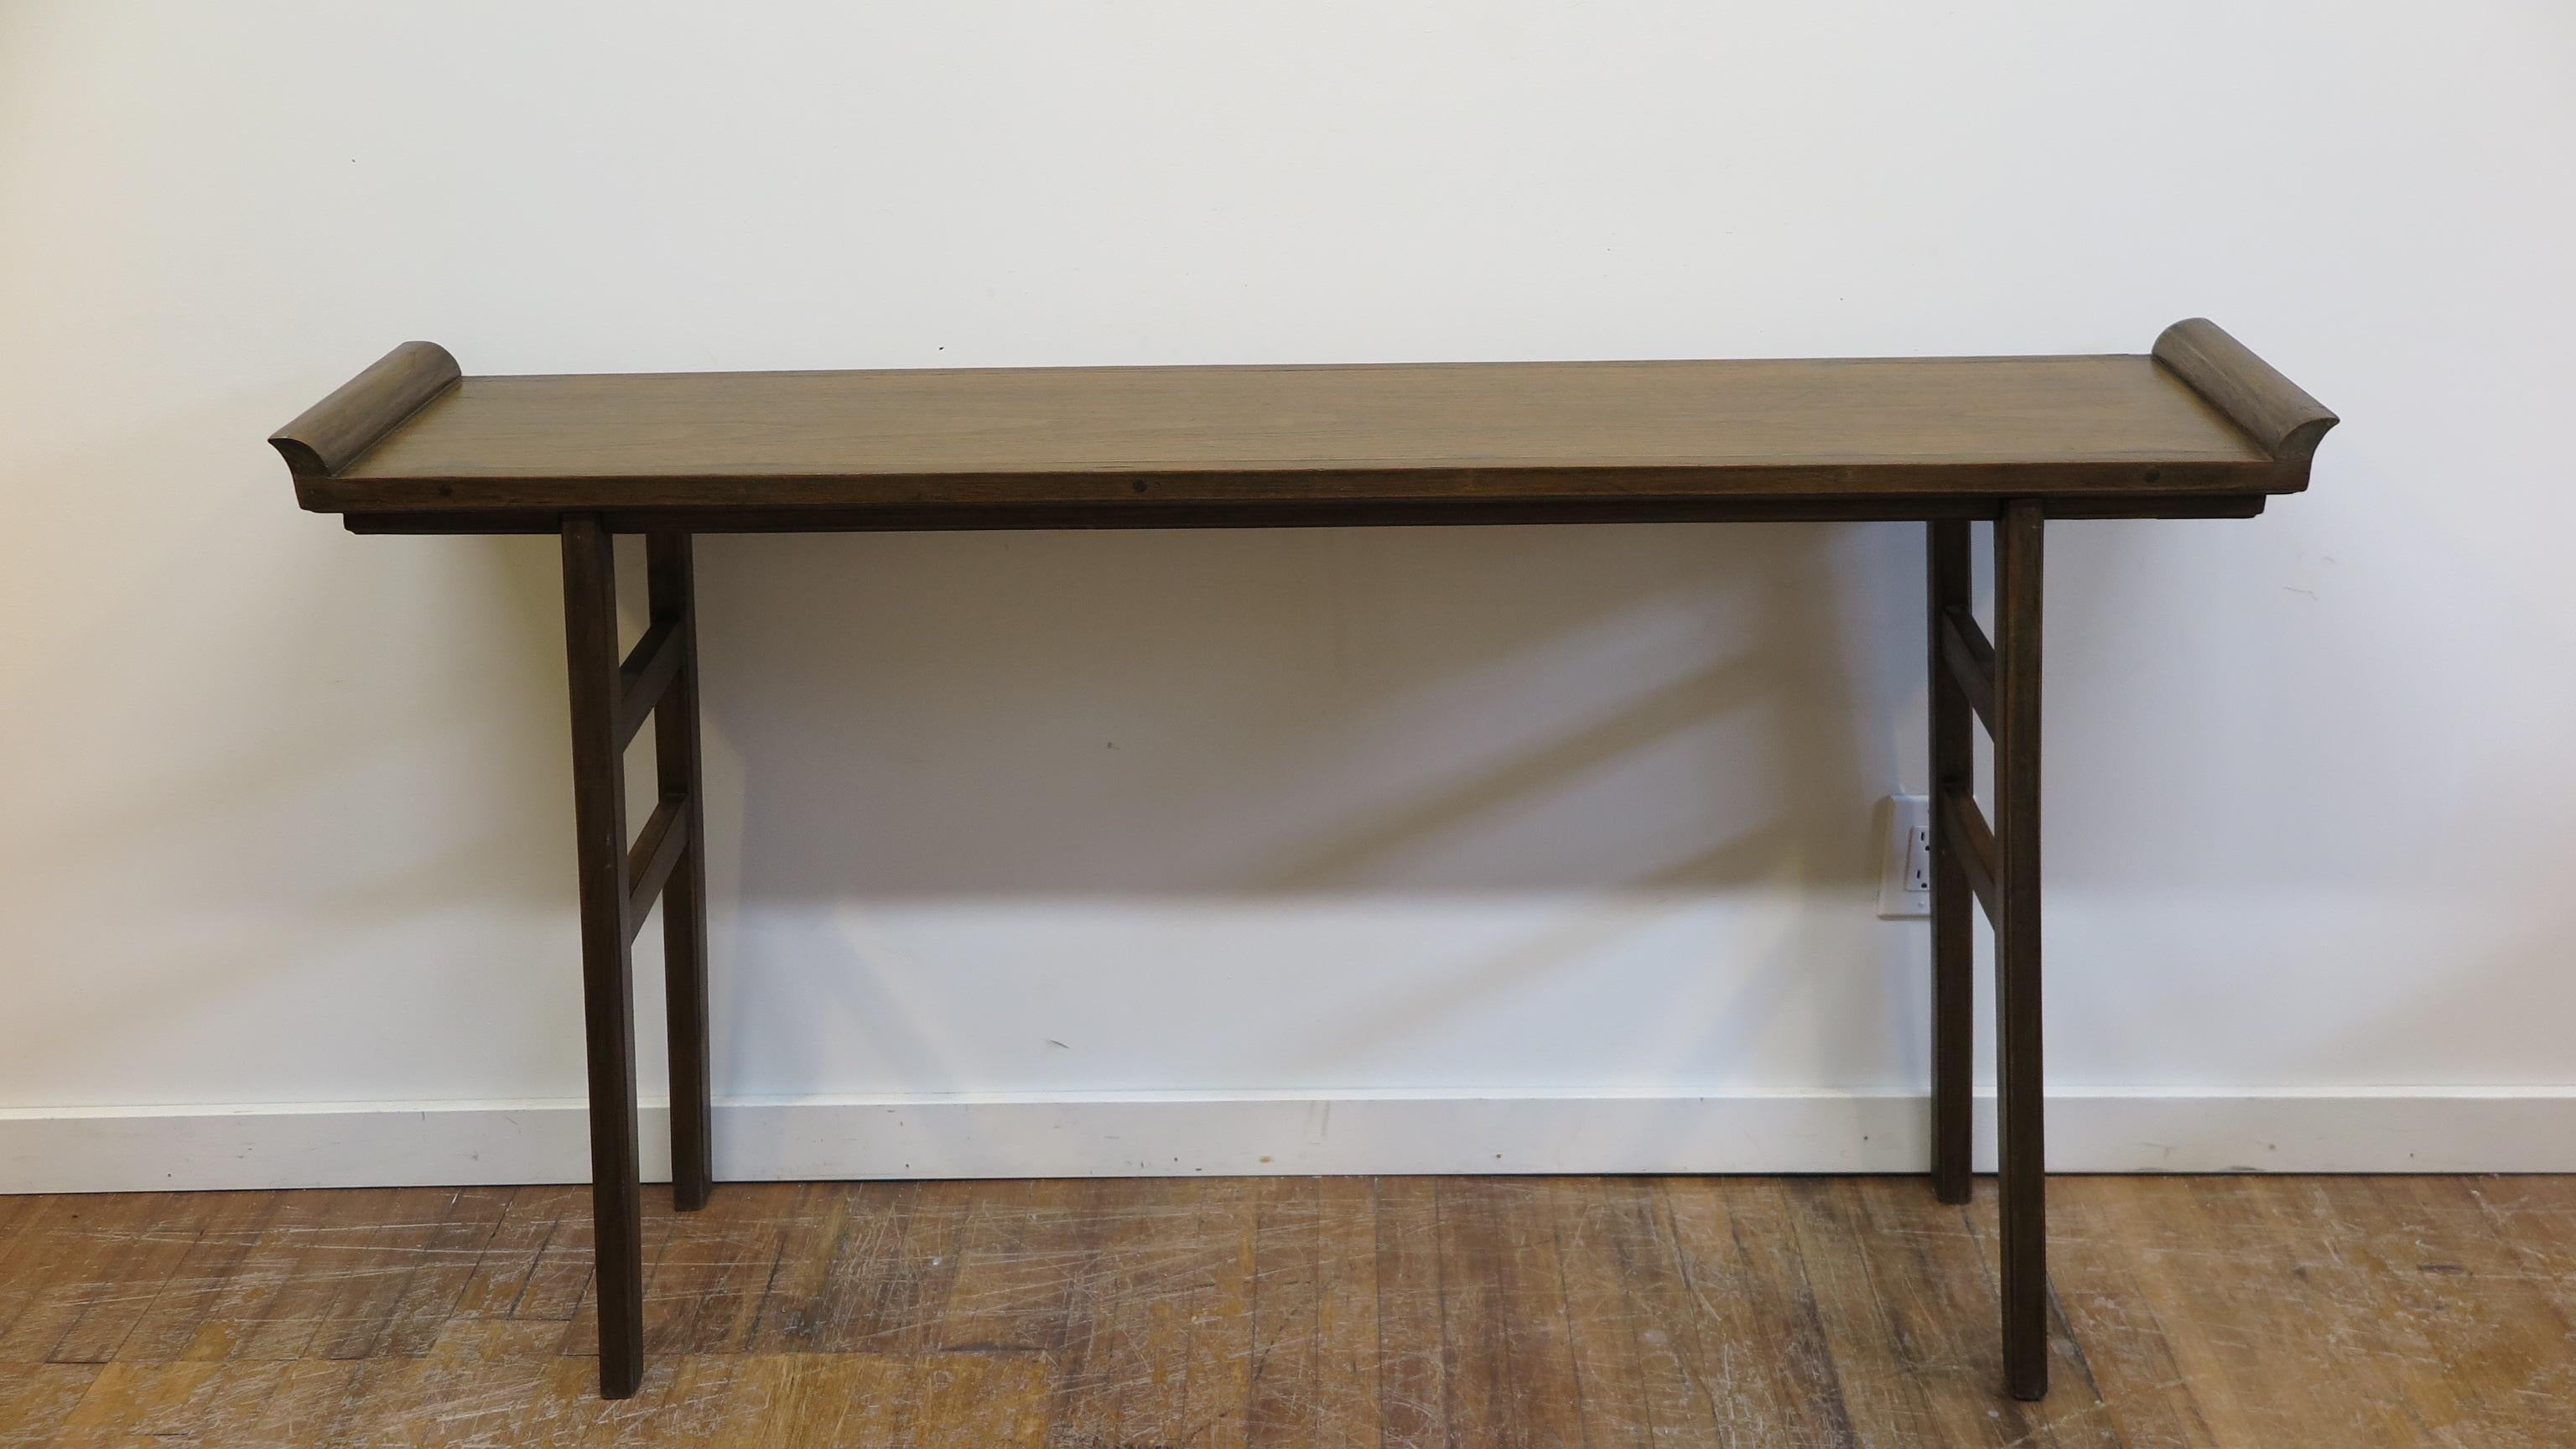 Teak console table with averted flanges and splayed legs.  Clean lines with shallow depth and mid century design elements.   Perfect for tight spaces or where thin profile is preferred.  Solid Teak wood. In very good condition.  